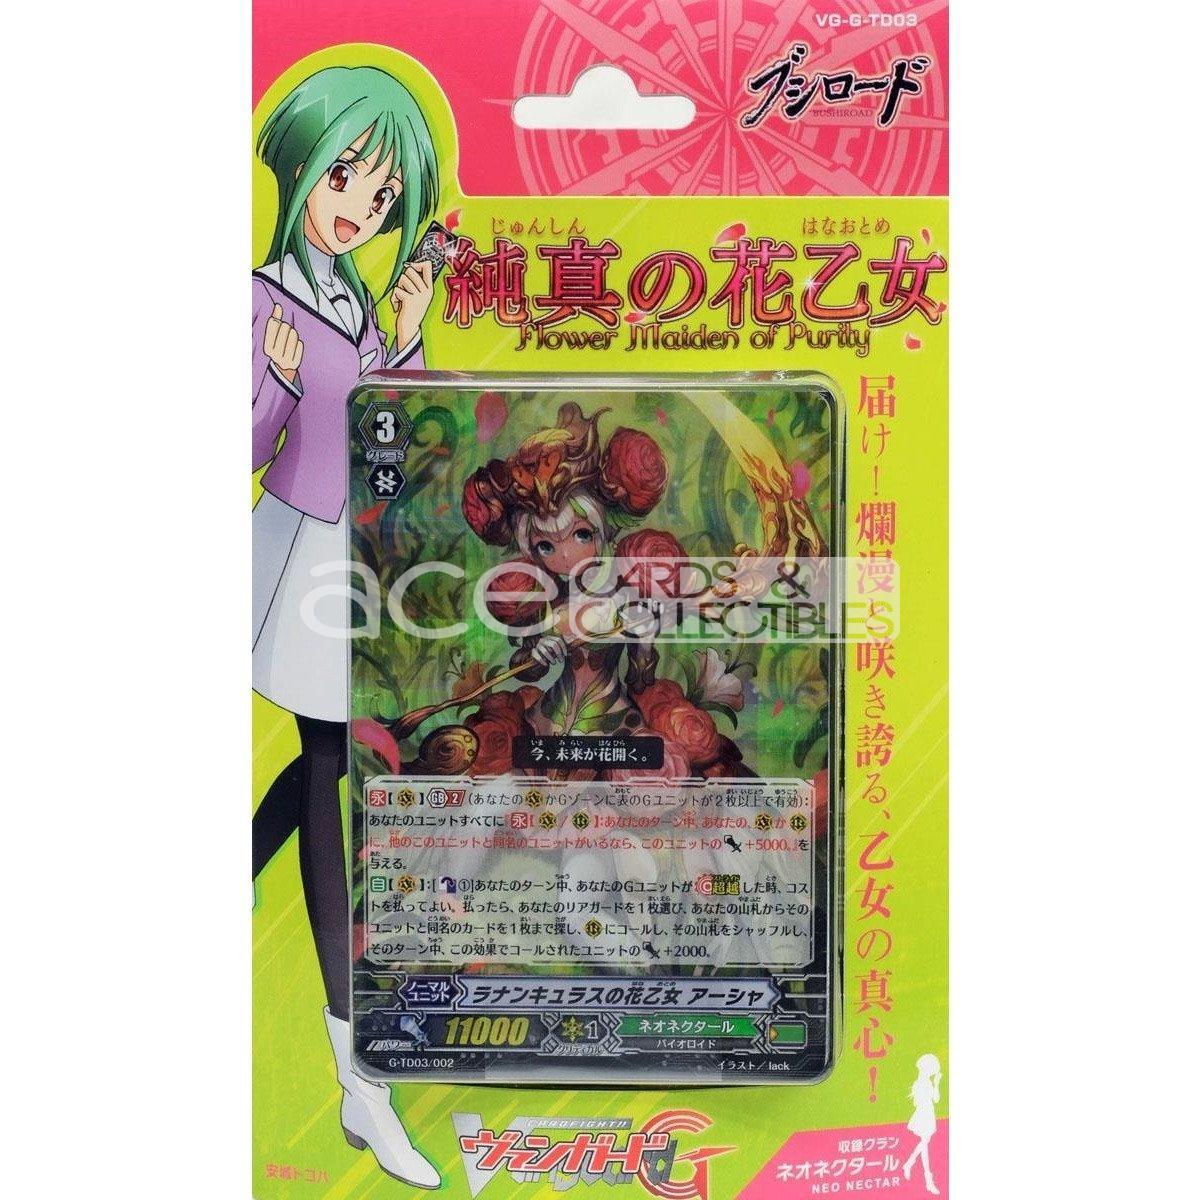 Cardfight Vanguard G Flower Maiden of Purity [VG-G-TD03] (Japanese)-Bushiroad-Ace Cards & Collectibles